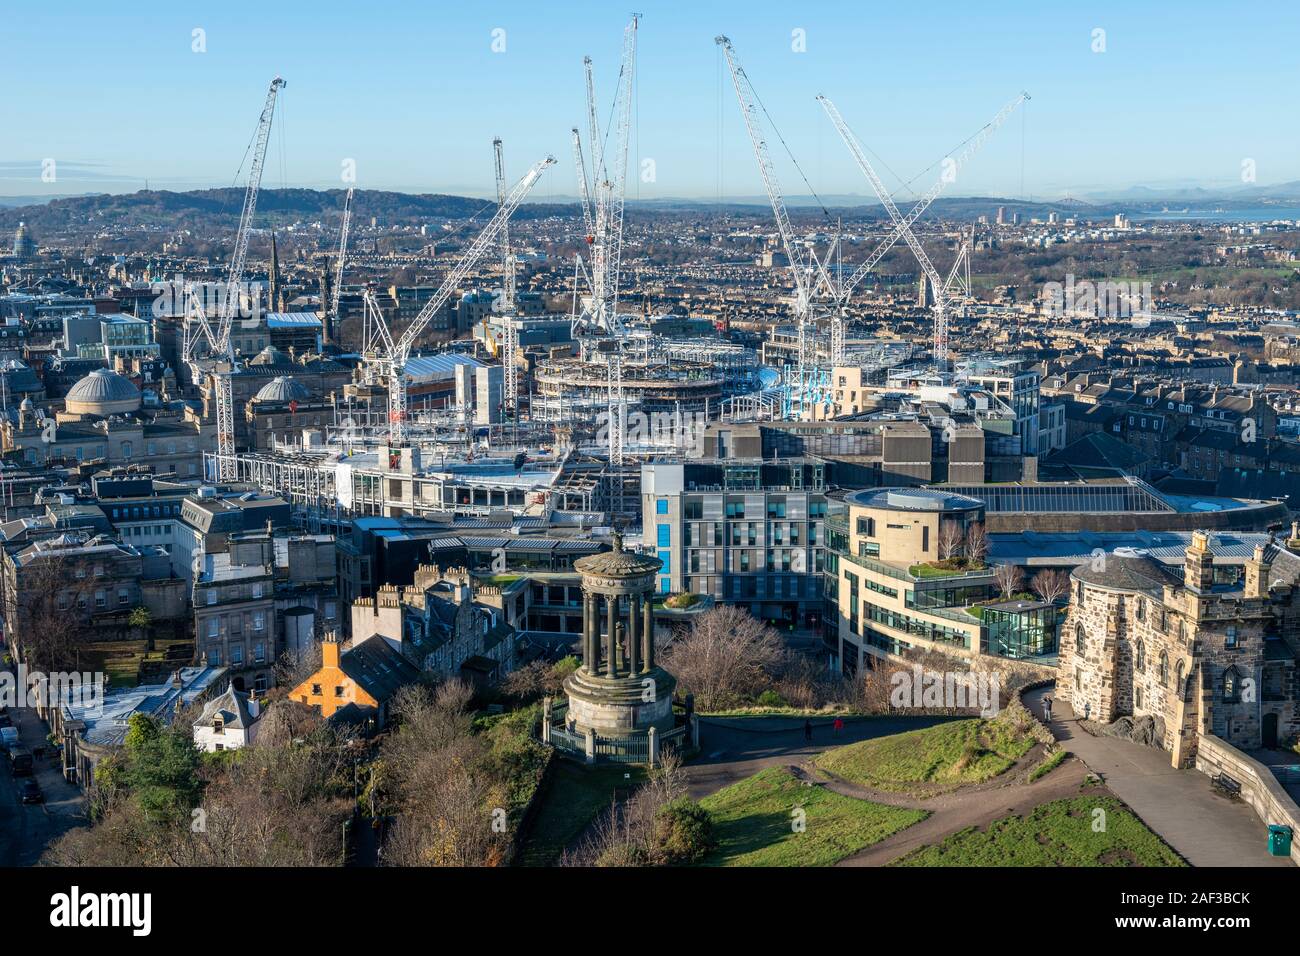 Aerial view of tower cranes at St James Centre redevelopment site with Dugald Stewart Monument in foreground from Calton Hill, Edinburgh, Scotland, UK Stock Photo